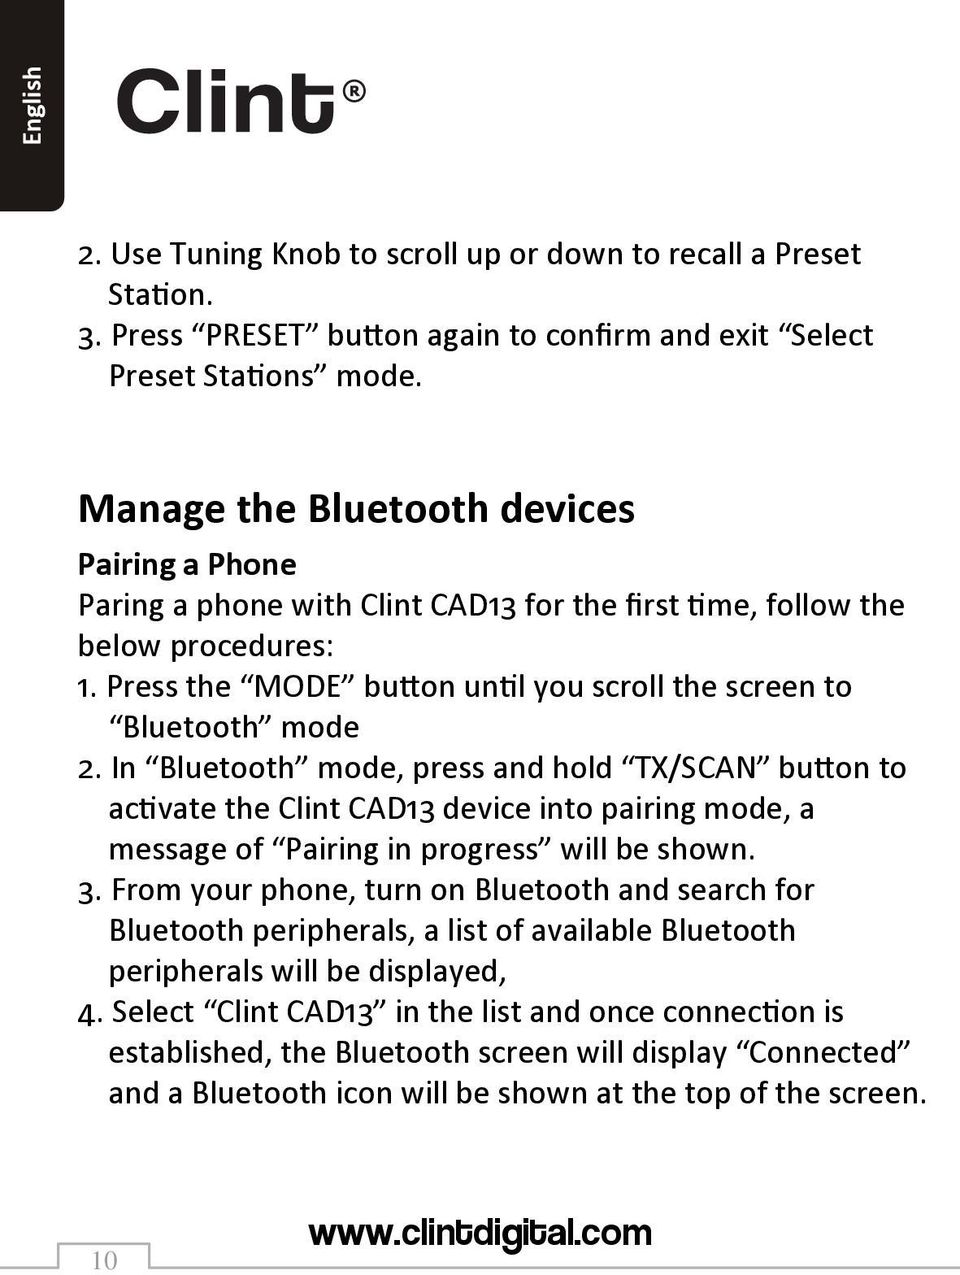 In Bluetooth mode, press and hold TX/SCAN button to activate the Clint CAD13 device into pairing mode, a message of Pairing in progress will be shown. 3.